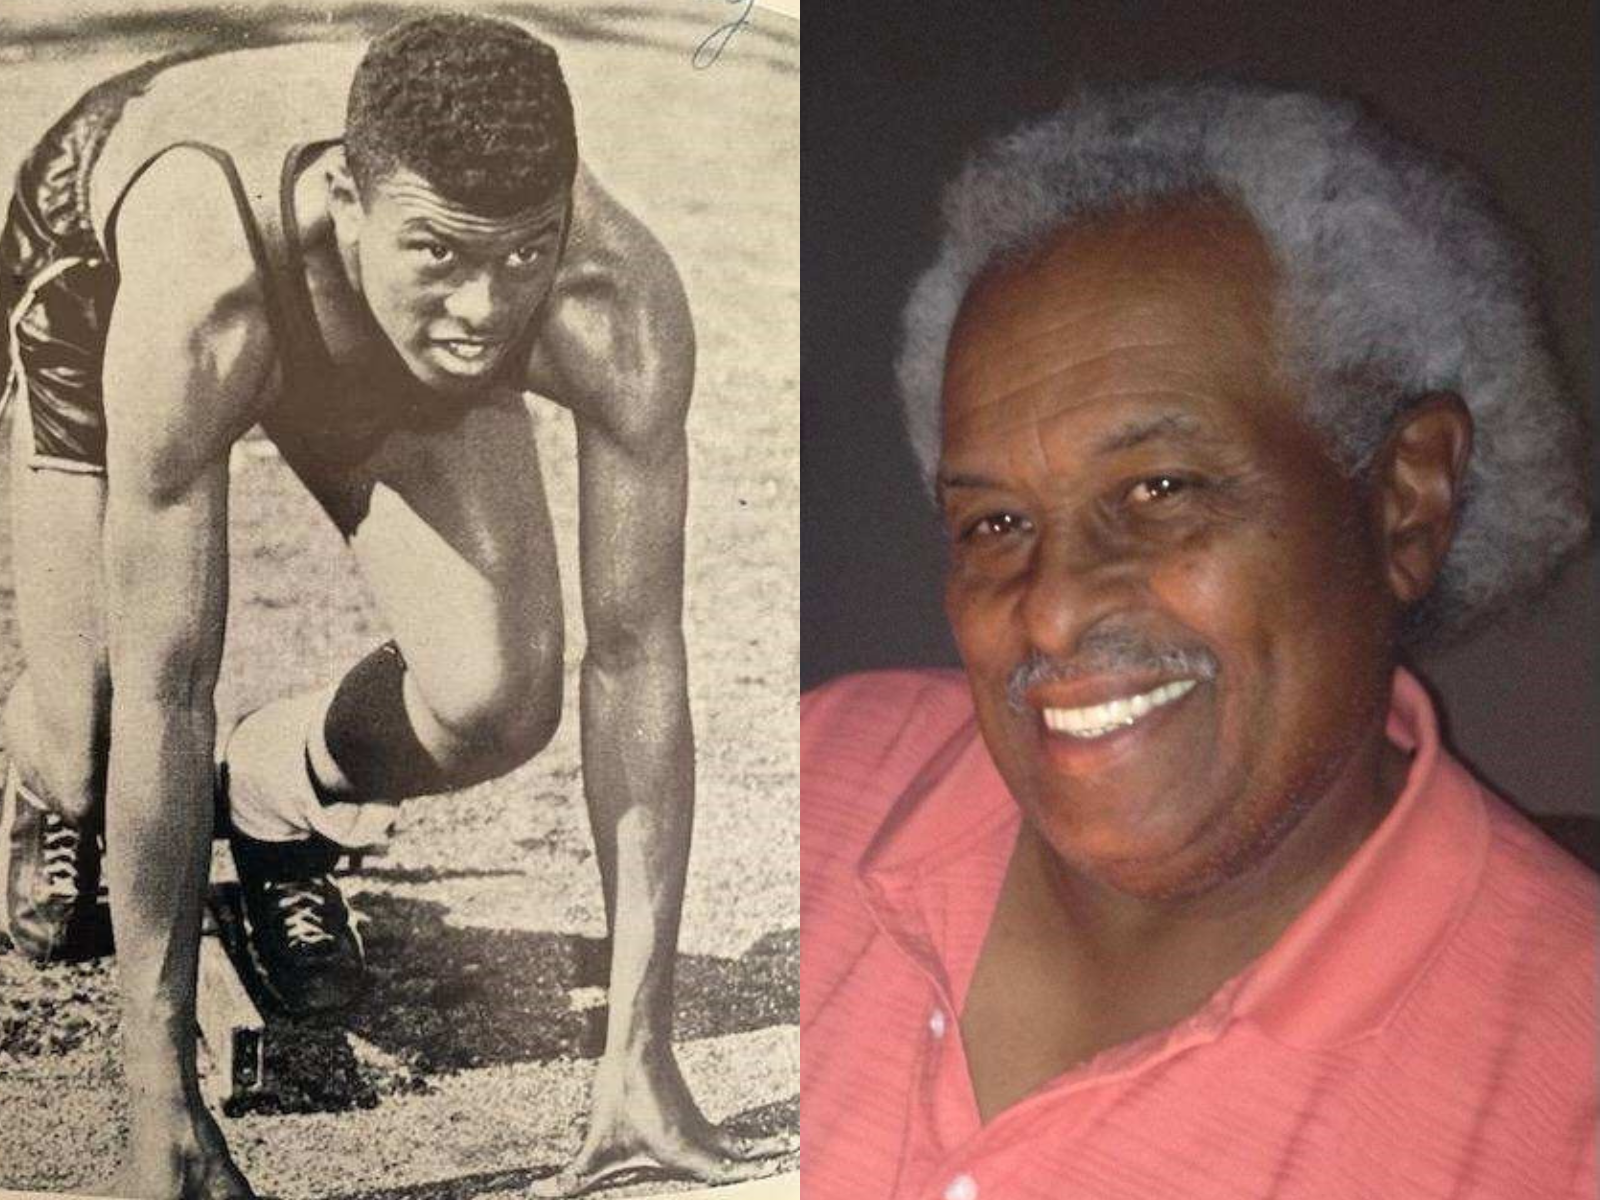 Two pictures of Robert "Bevo" Looney side-by-side. The picture on the left is a black-and-white photo from his days as a high-school track athlete. On the right is a color photo of Looney as an adult